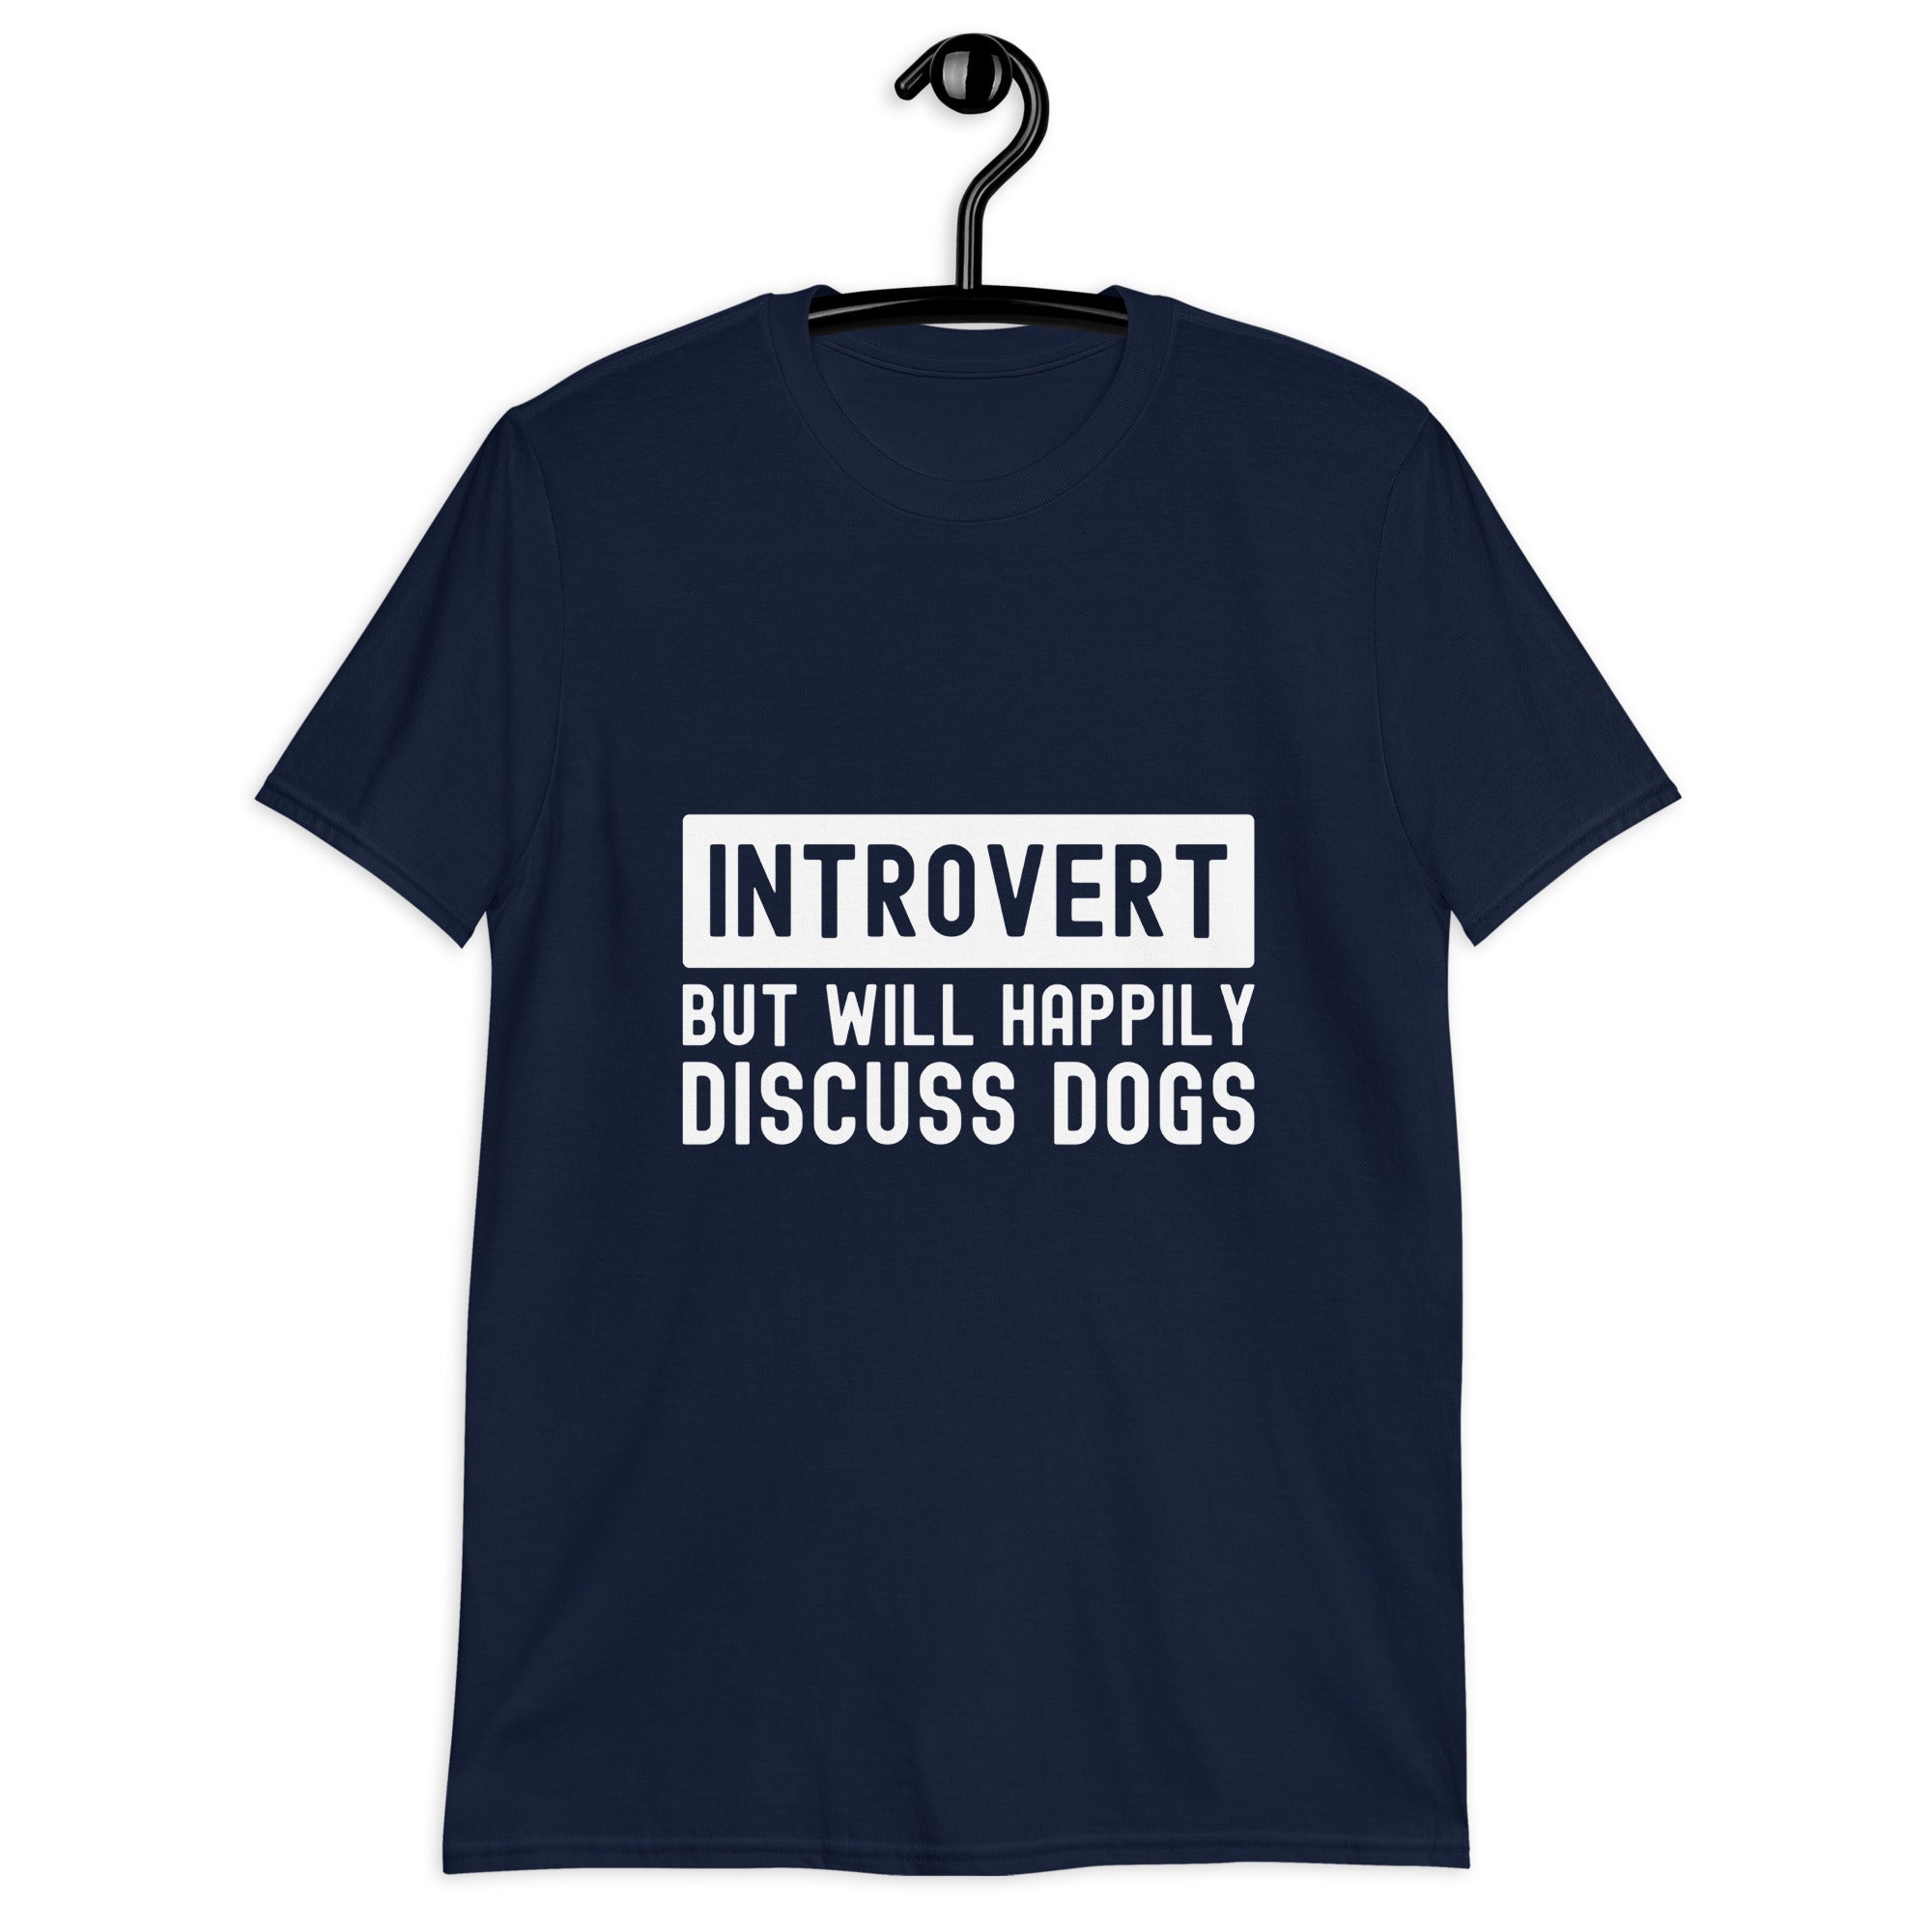 Short-Sleeve Unisex T-Shirt | Introvert but will happily discuss dogs